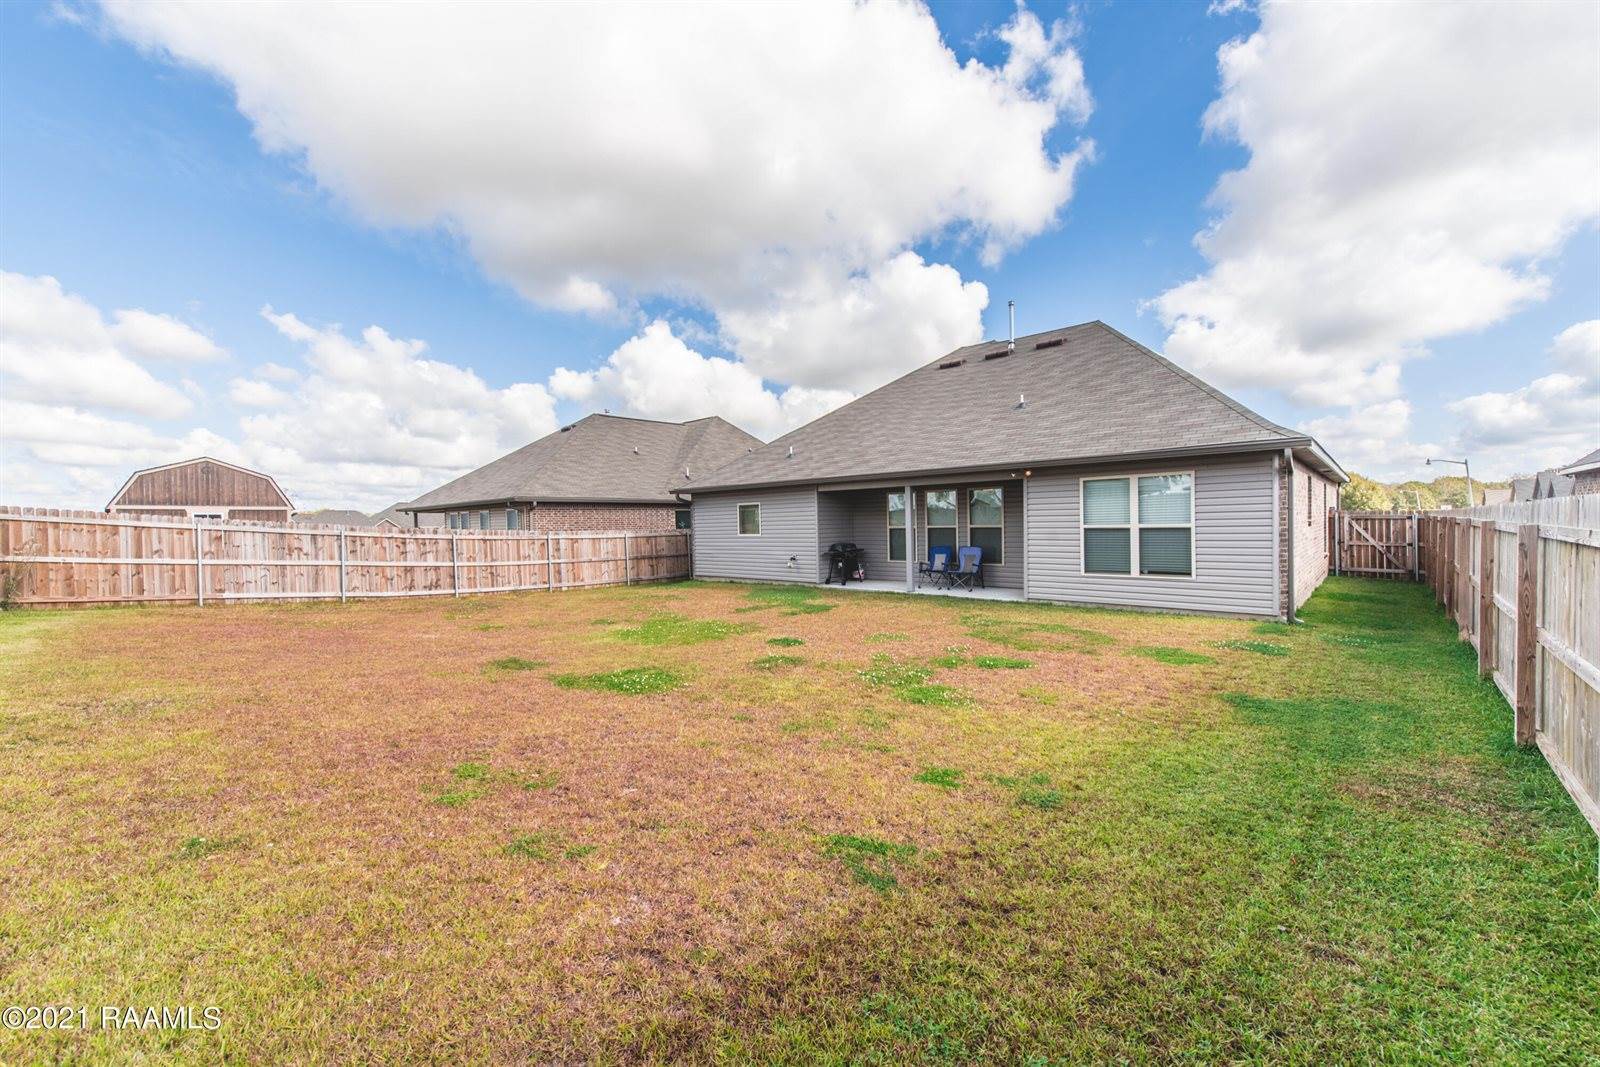 201 St. Caillin Street, Youngsville, LA 70592